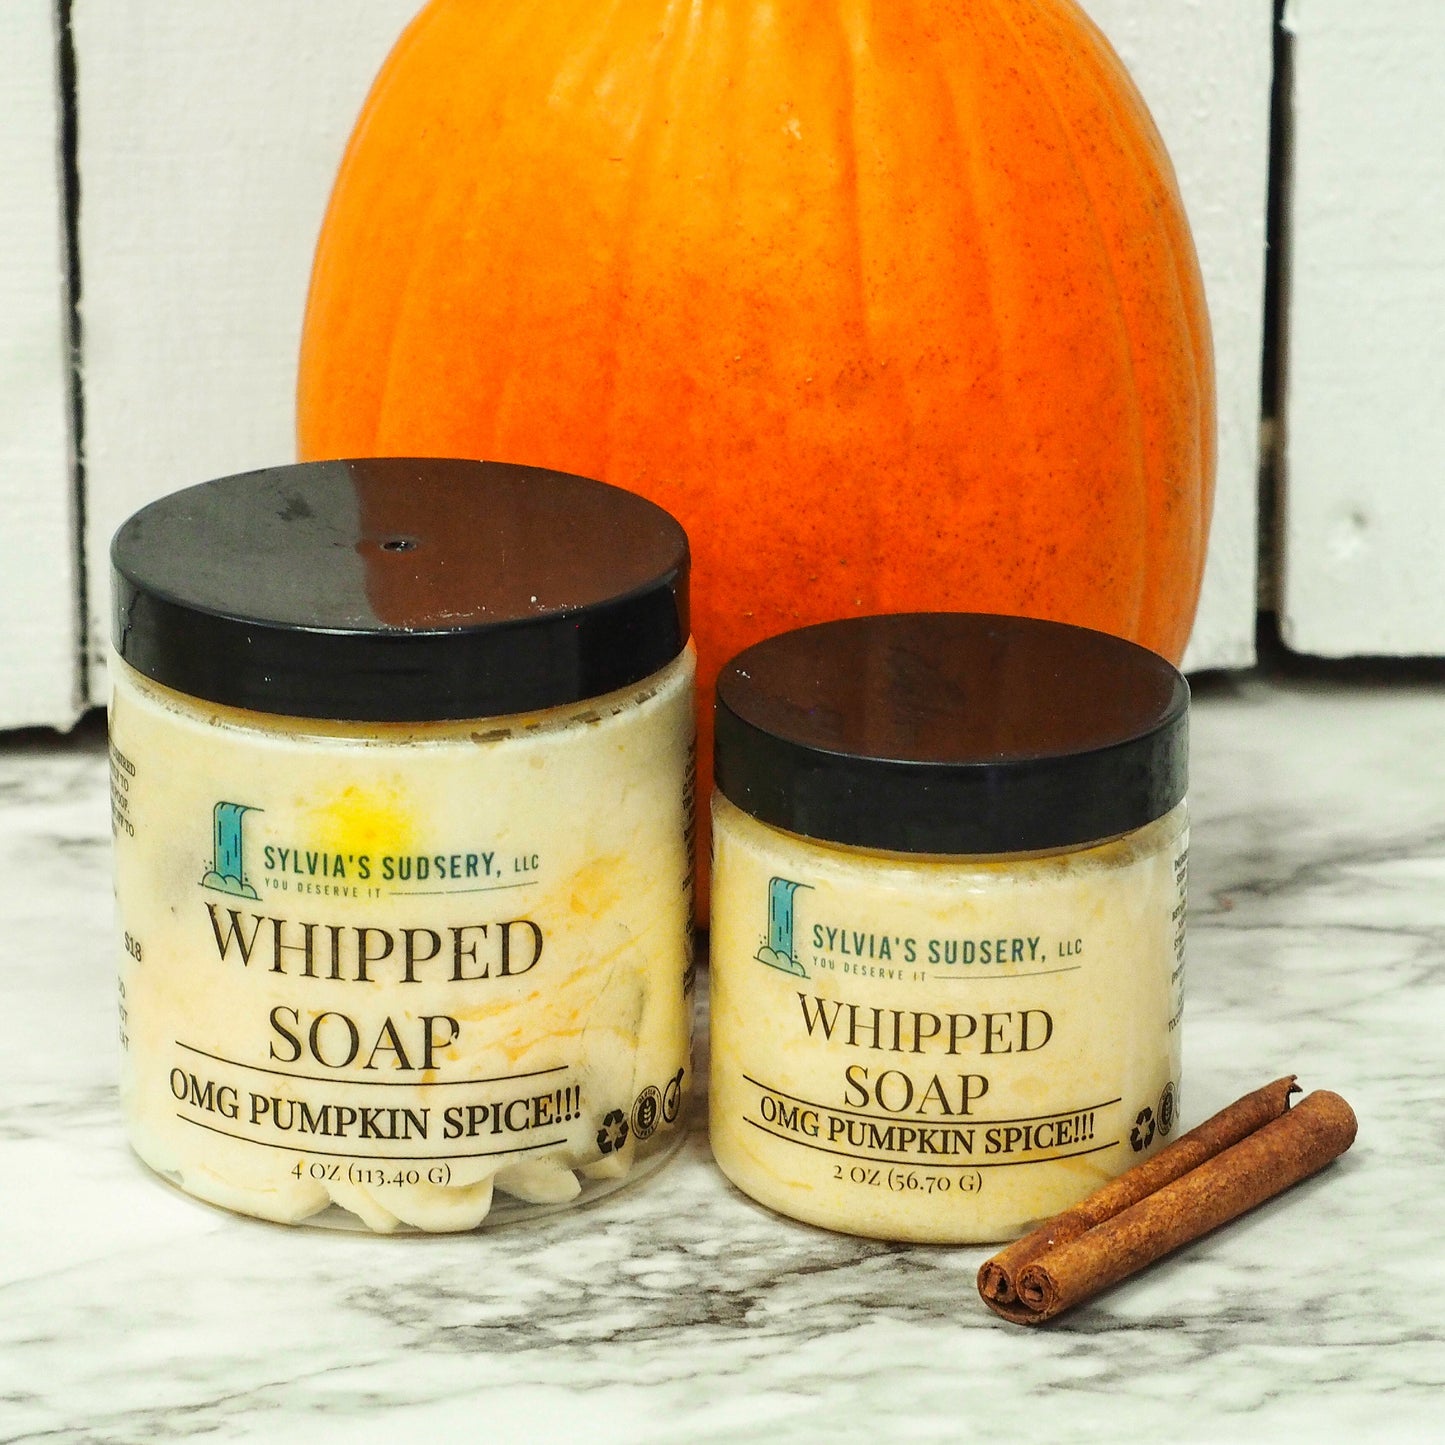 OMG PUMPKIN SPICE!!! WHIPPED SOAP